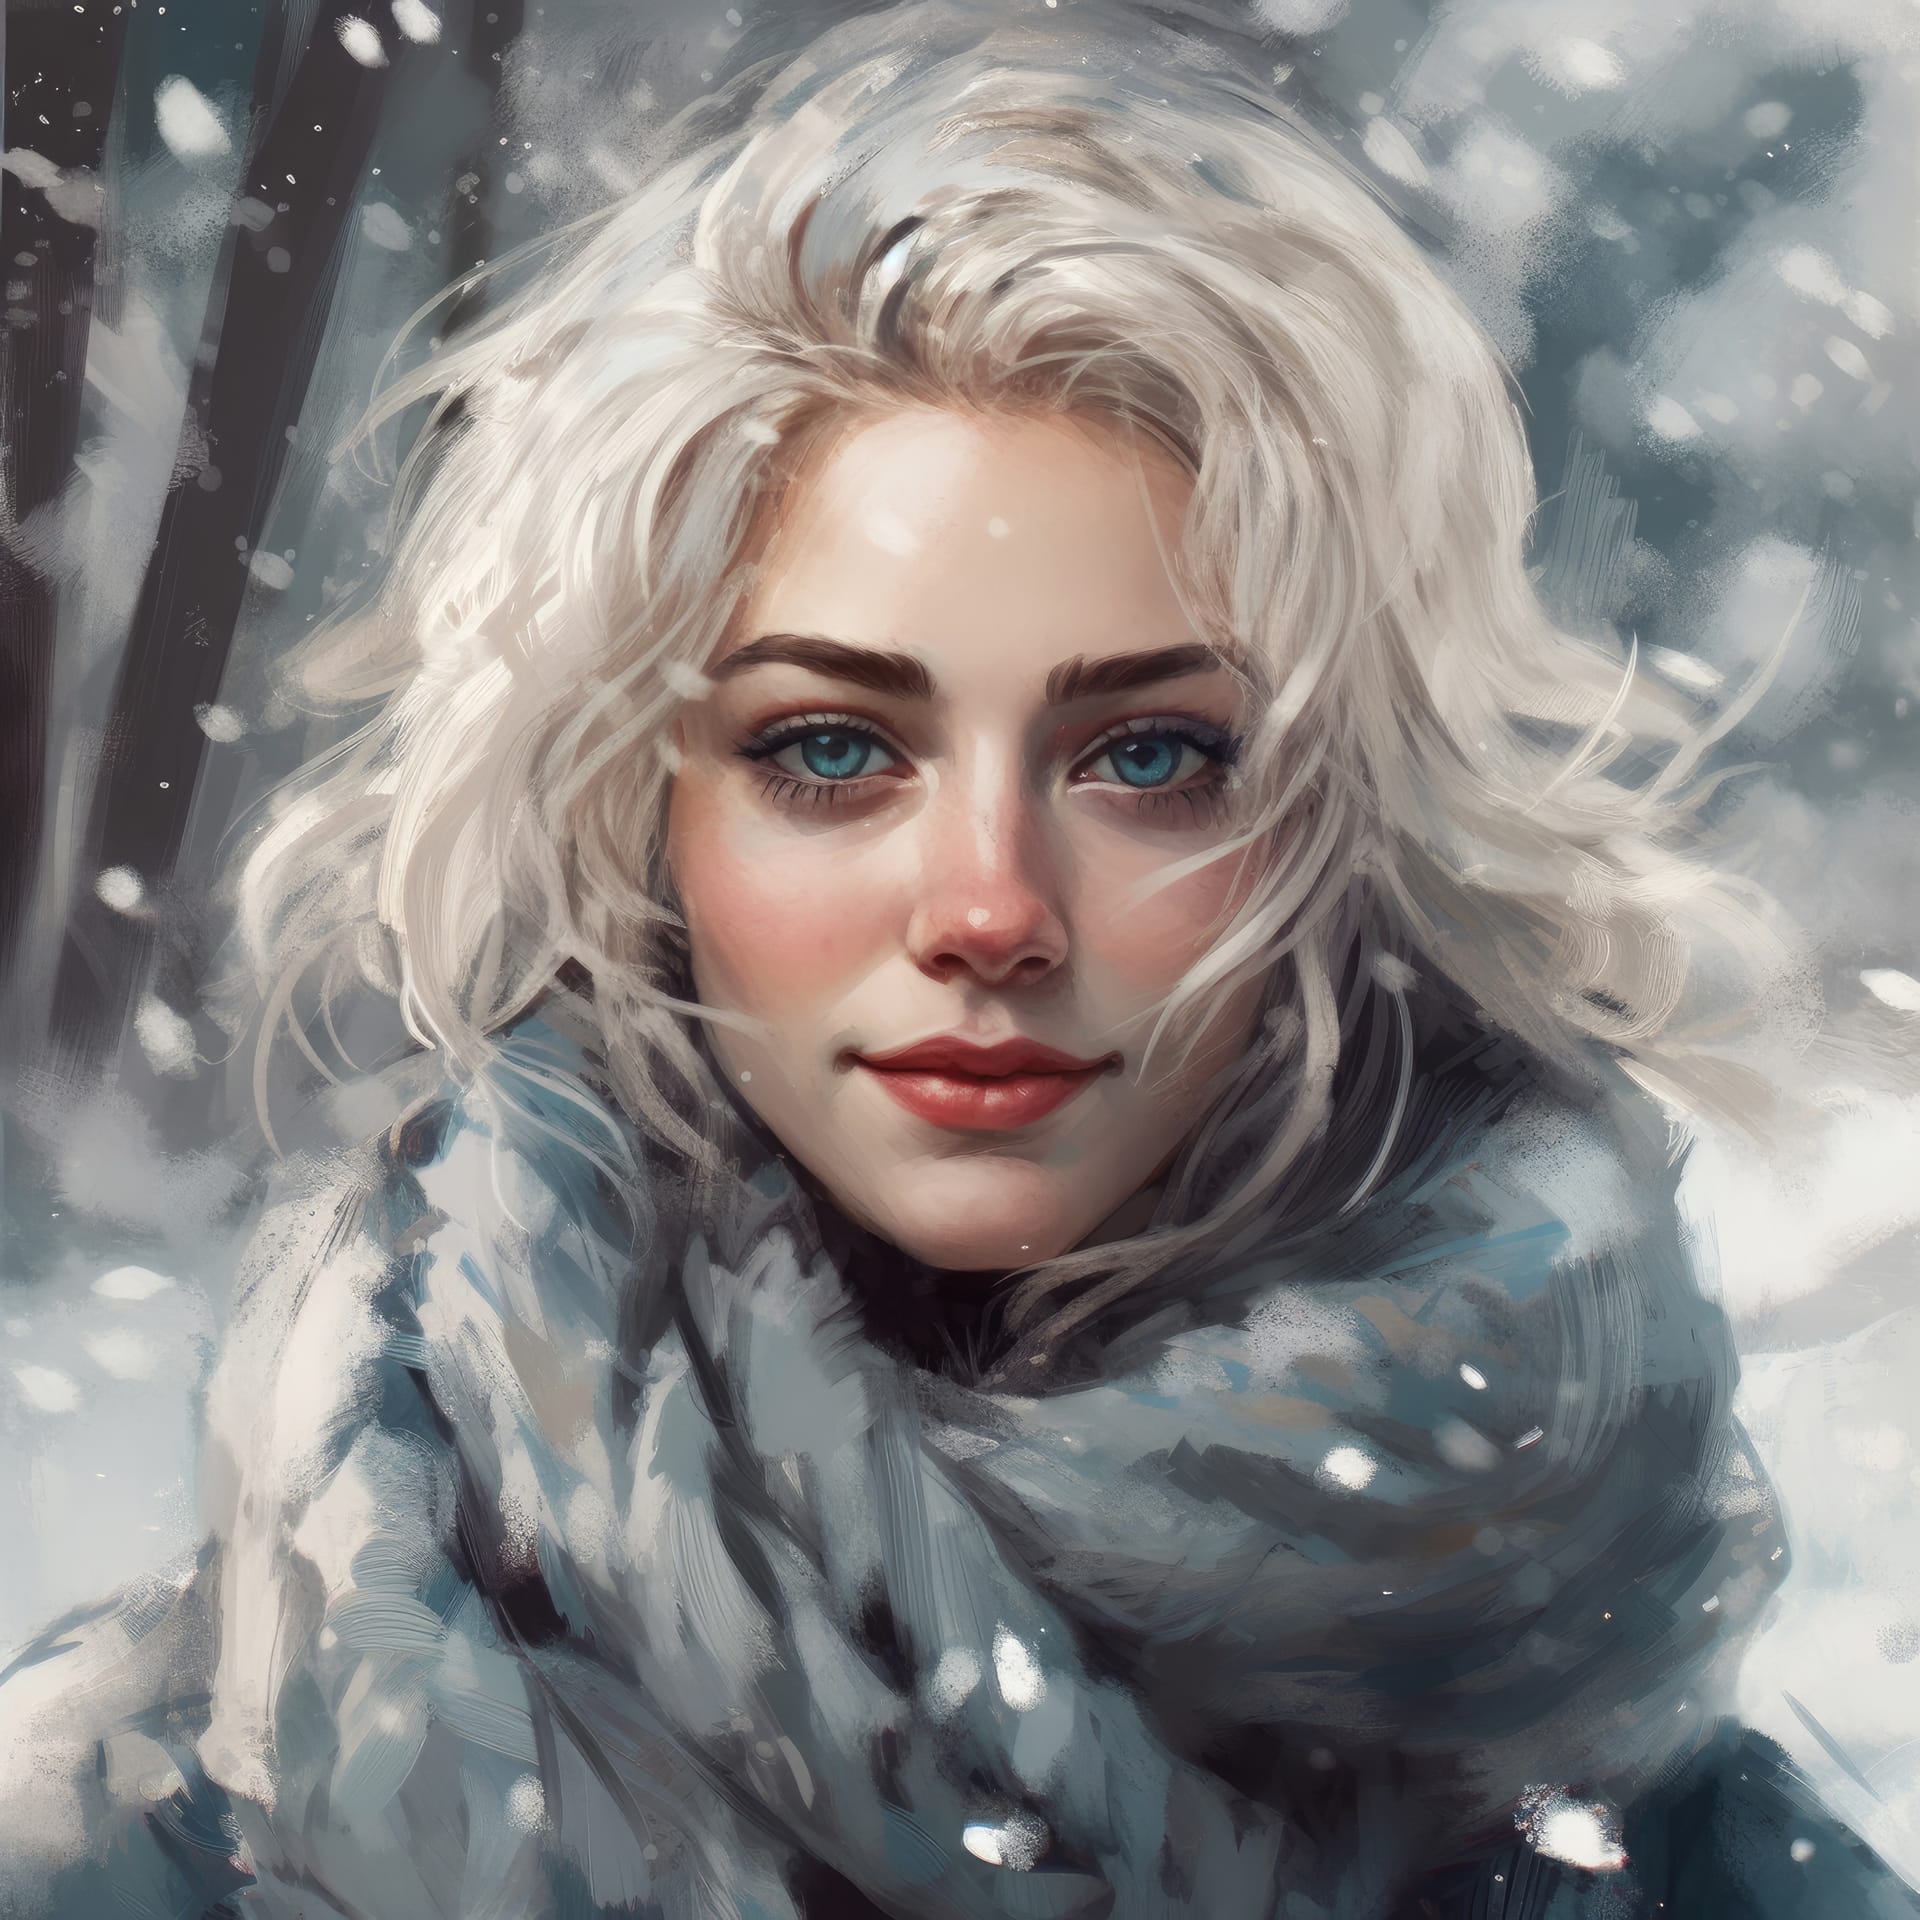 Woman with blue eyes scarf snow